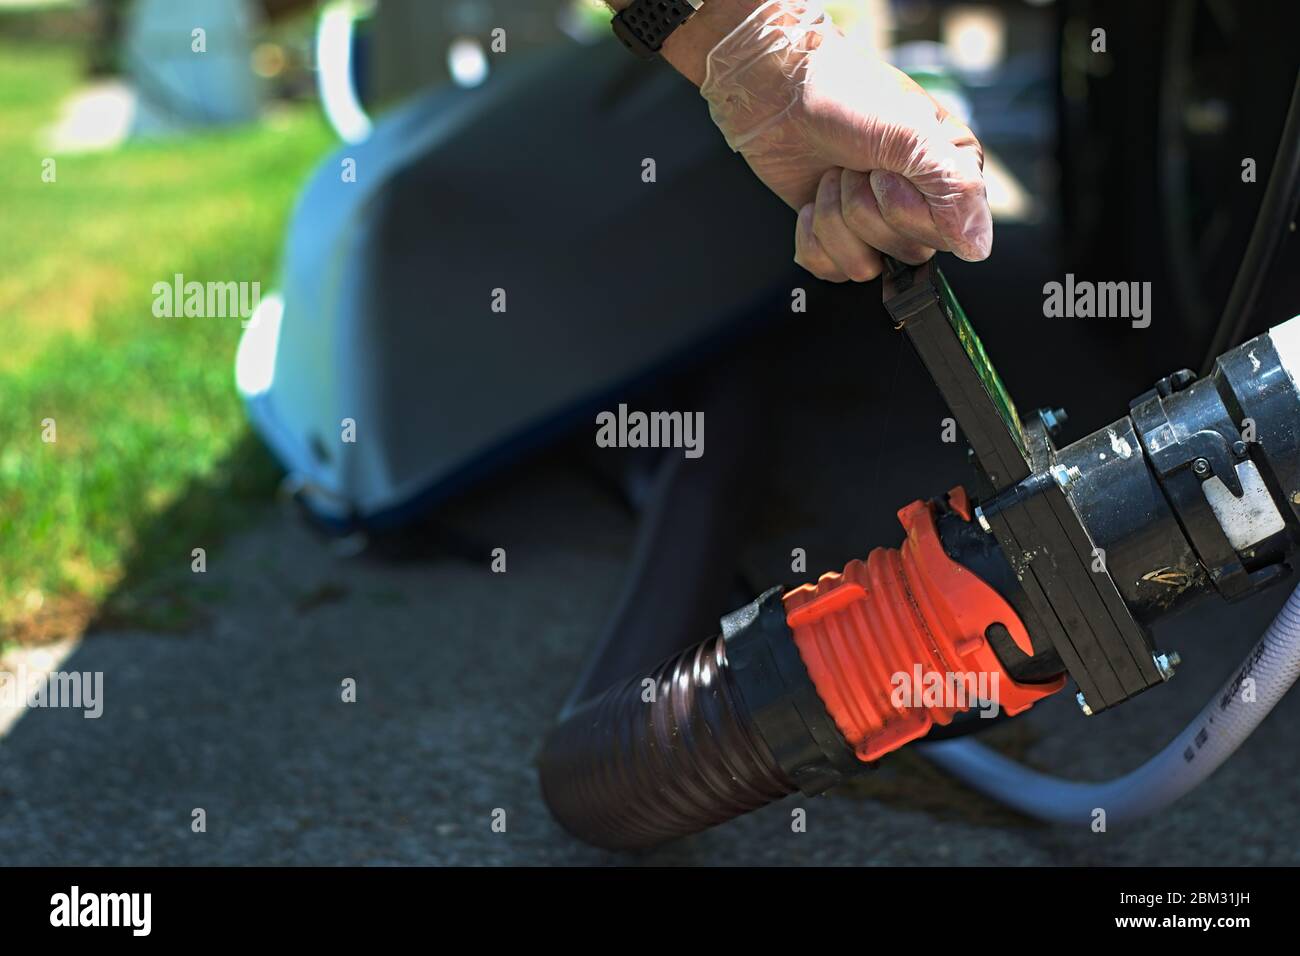 Hand dumping rv tank valve to release grey gray black waste water and sewage while parked at campsite dump station. Kayak lays in background. Stock Photo